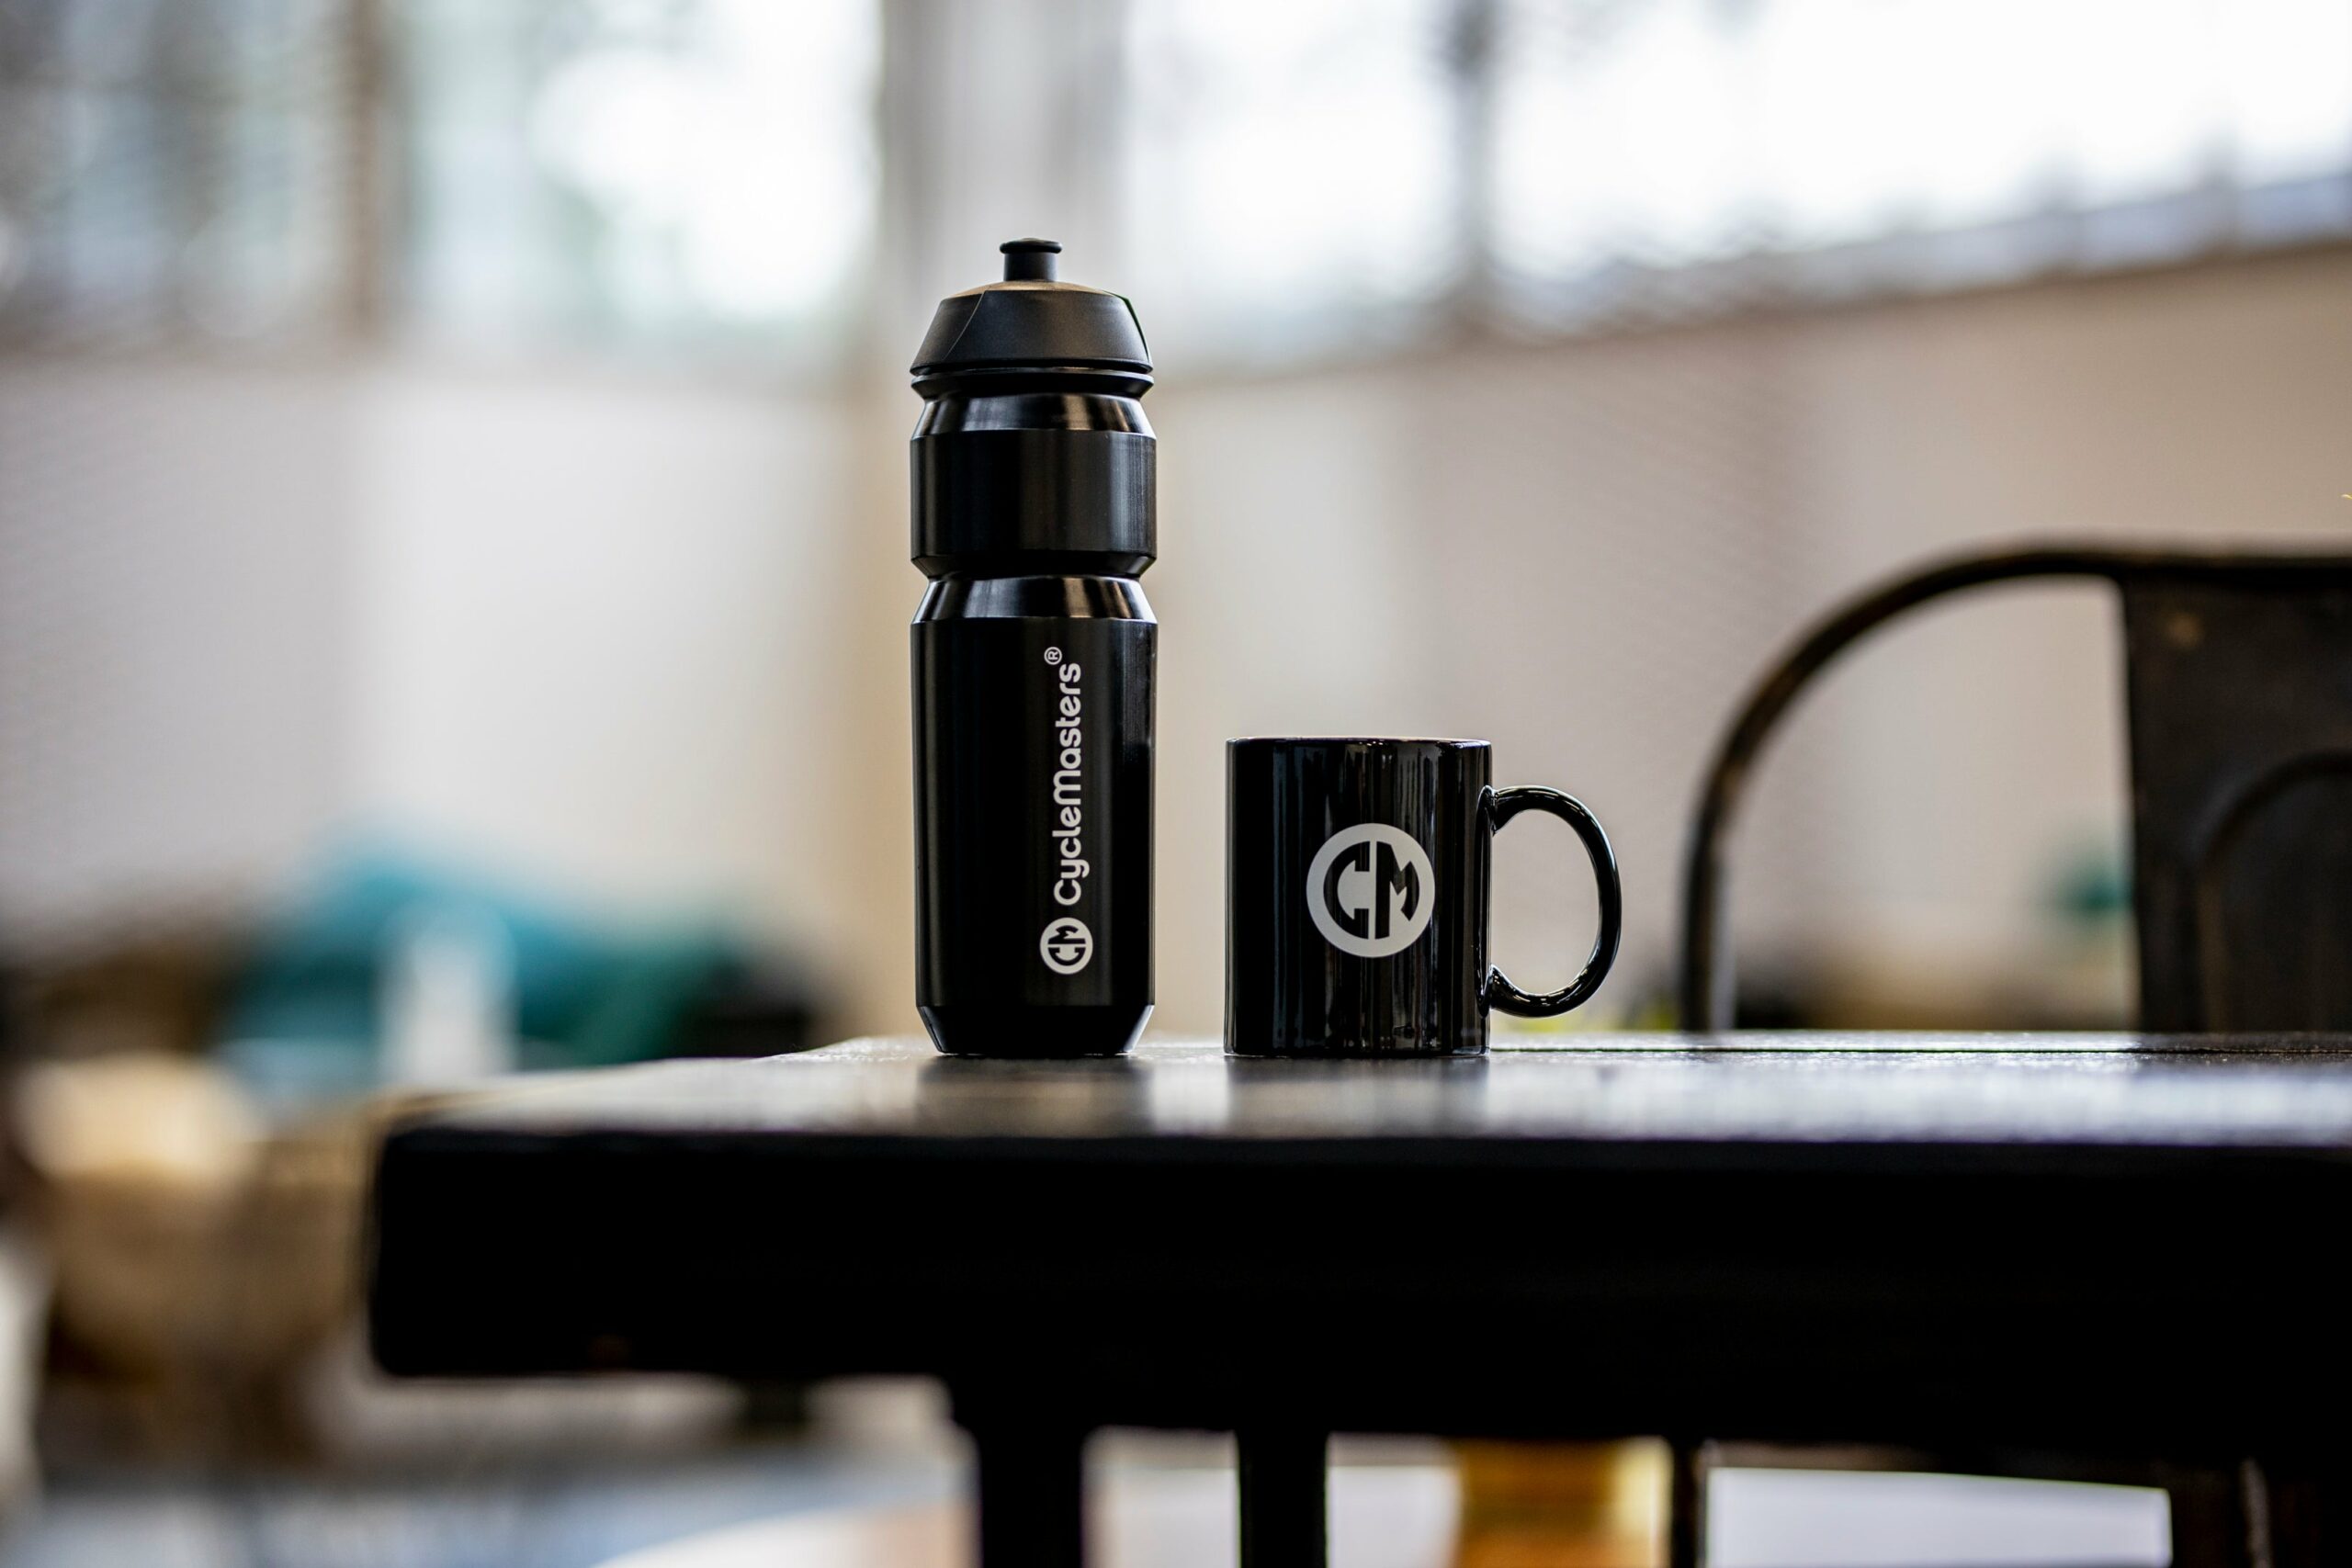 A black CycleMasters bottle and mug